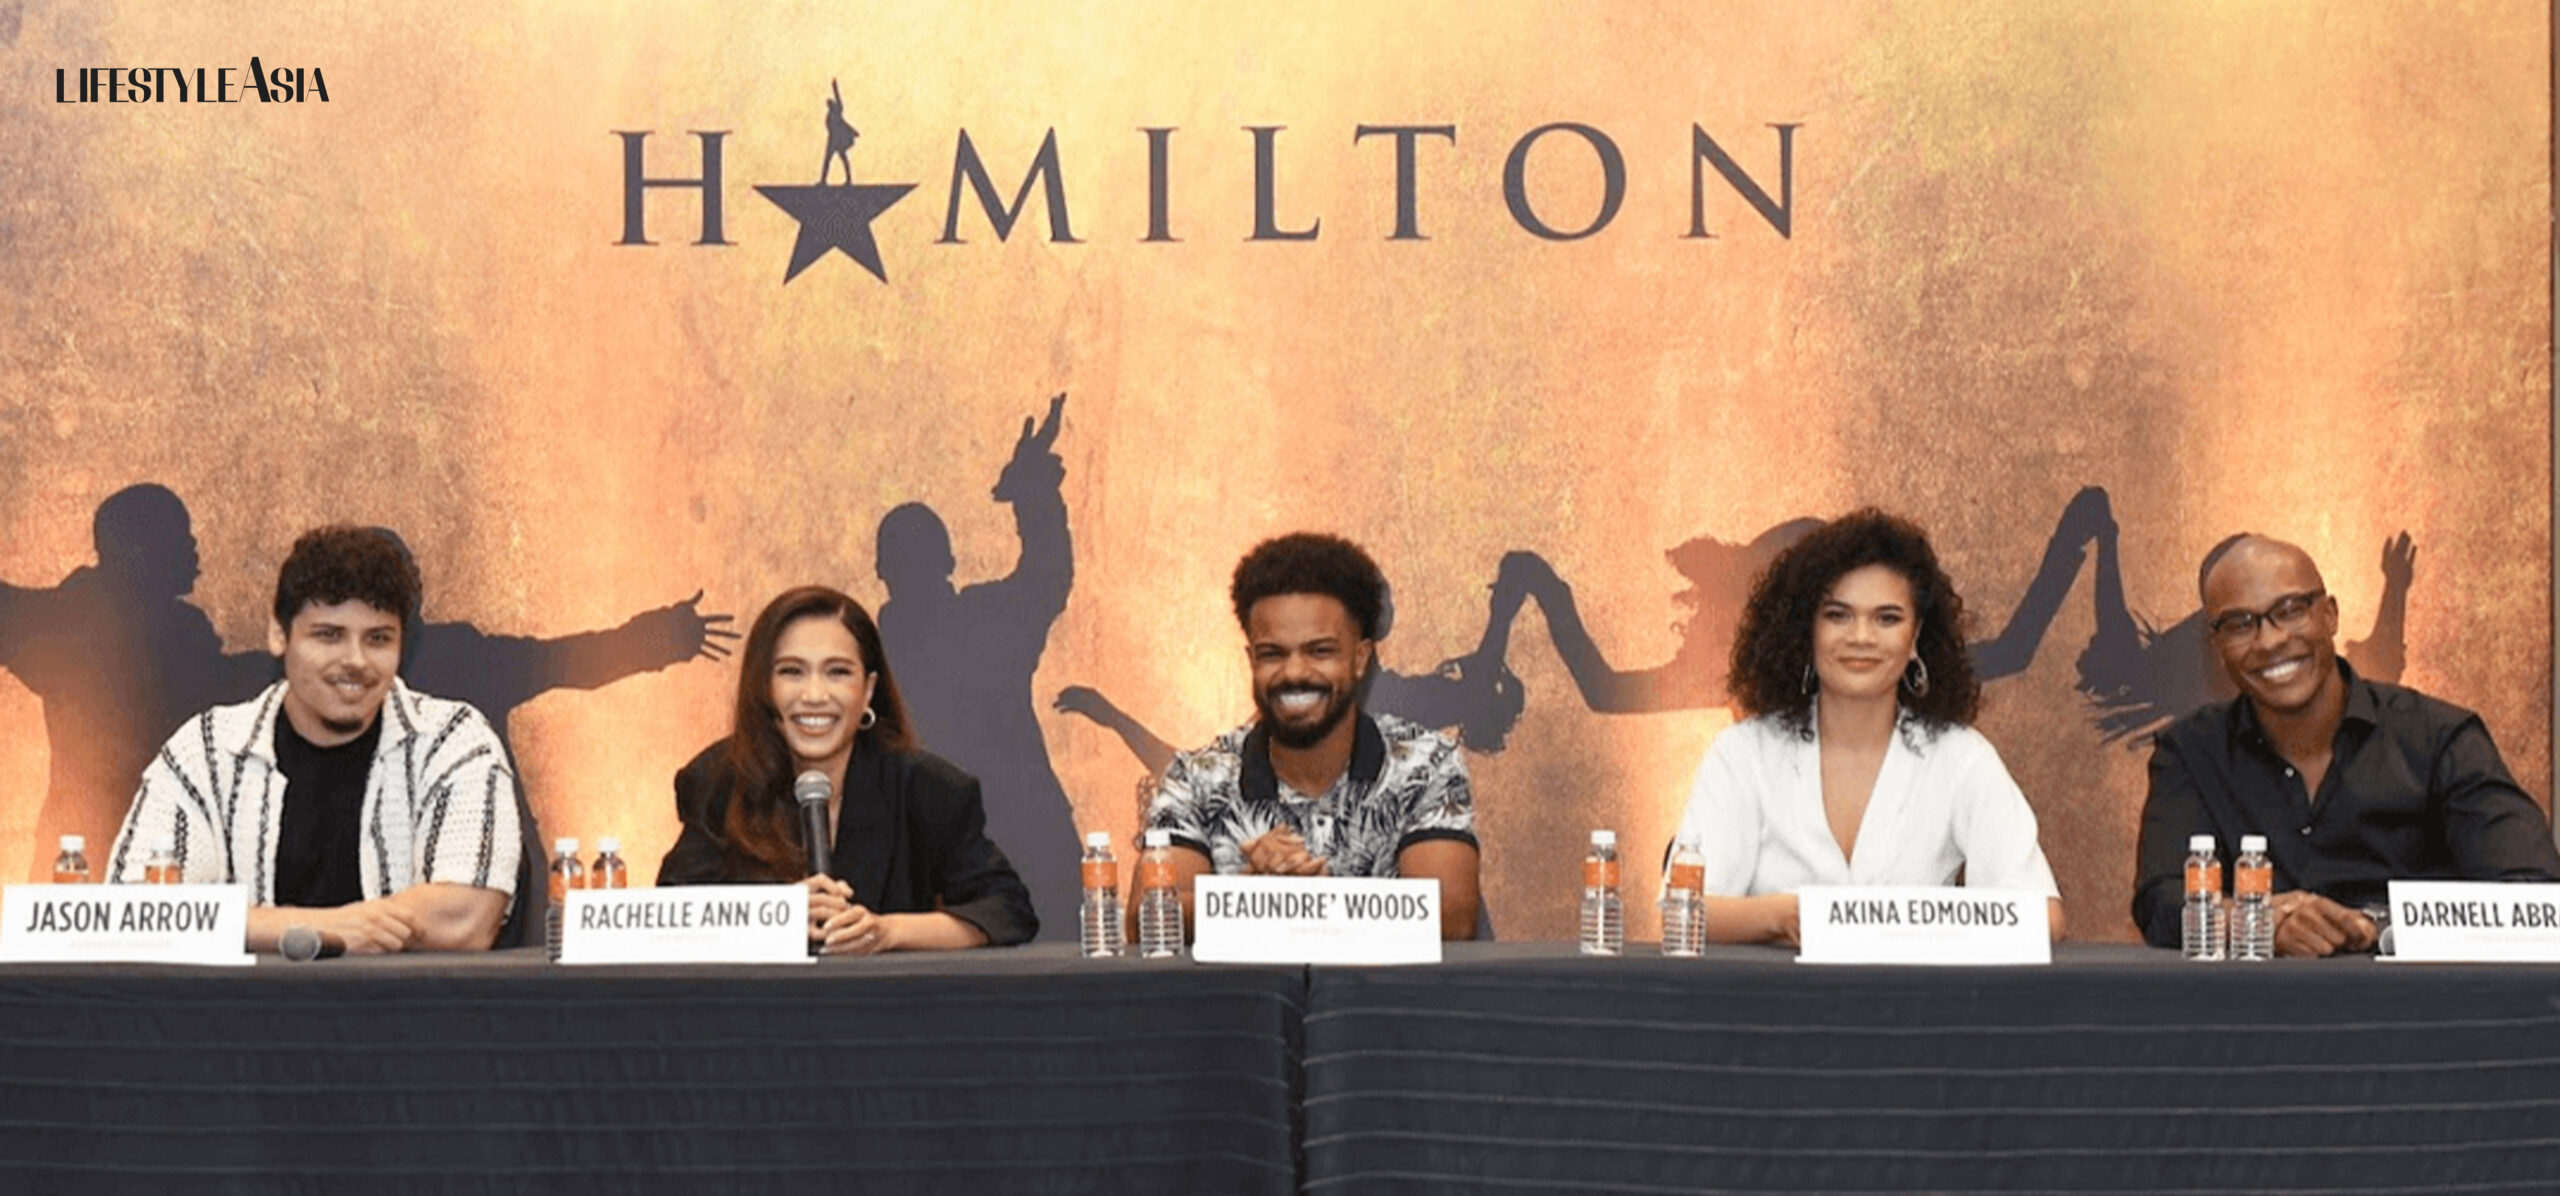 L-R: Jason Arrow, Rachelle Ann Go, Deaundre' Woods, Akina Edmonds, and Darnell Abraham in a press conference at Solaire